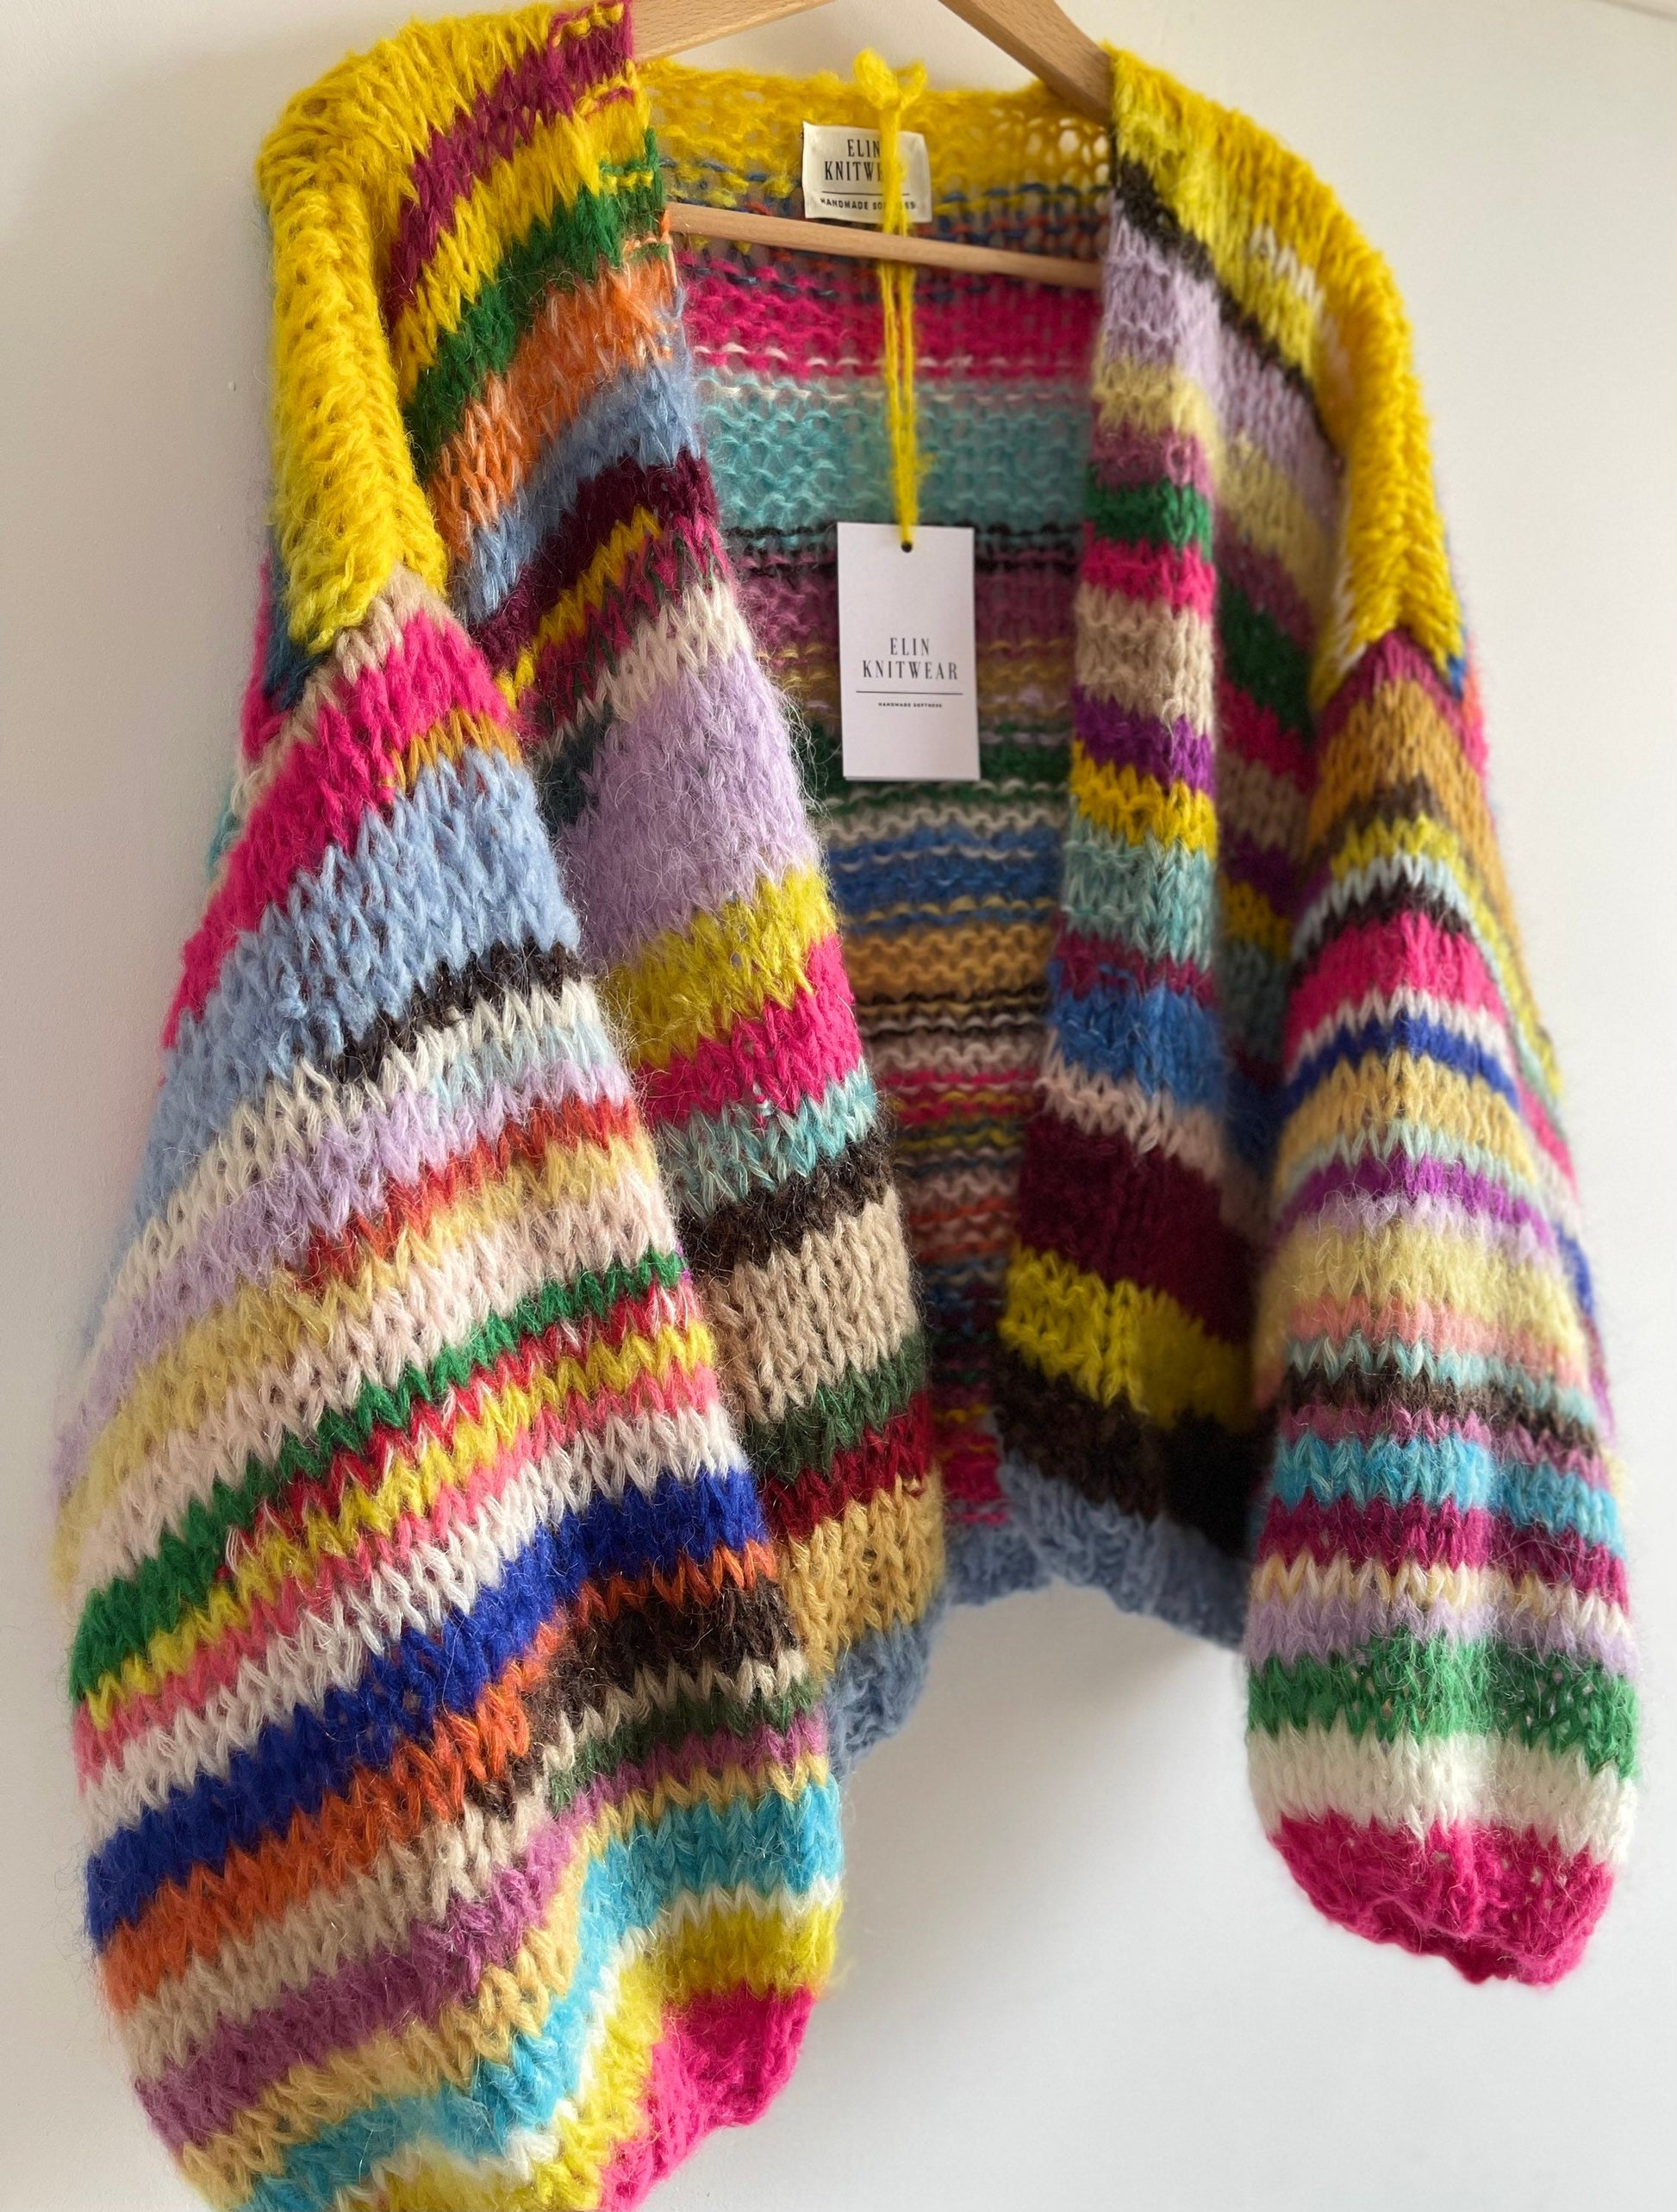 Wool Multicolor Handmade Sweaters/ Hand Knit Sweaters at Rs 6500